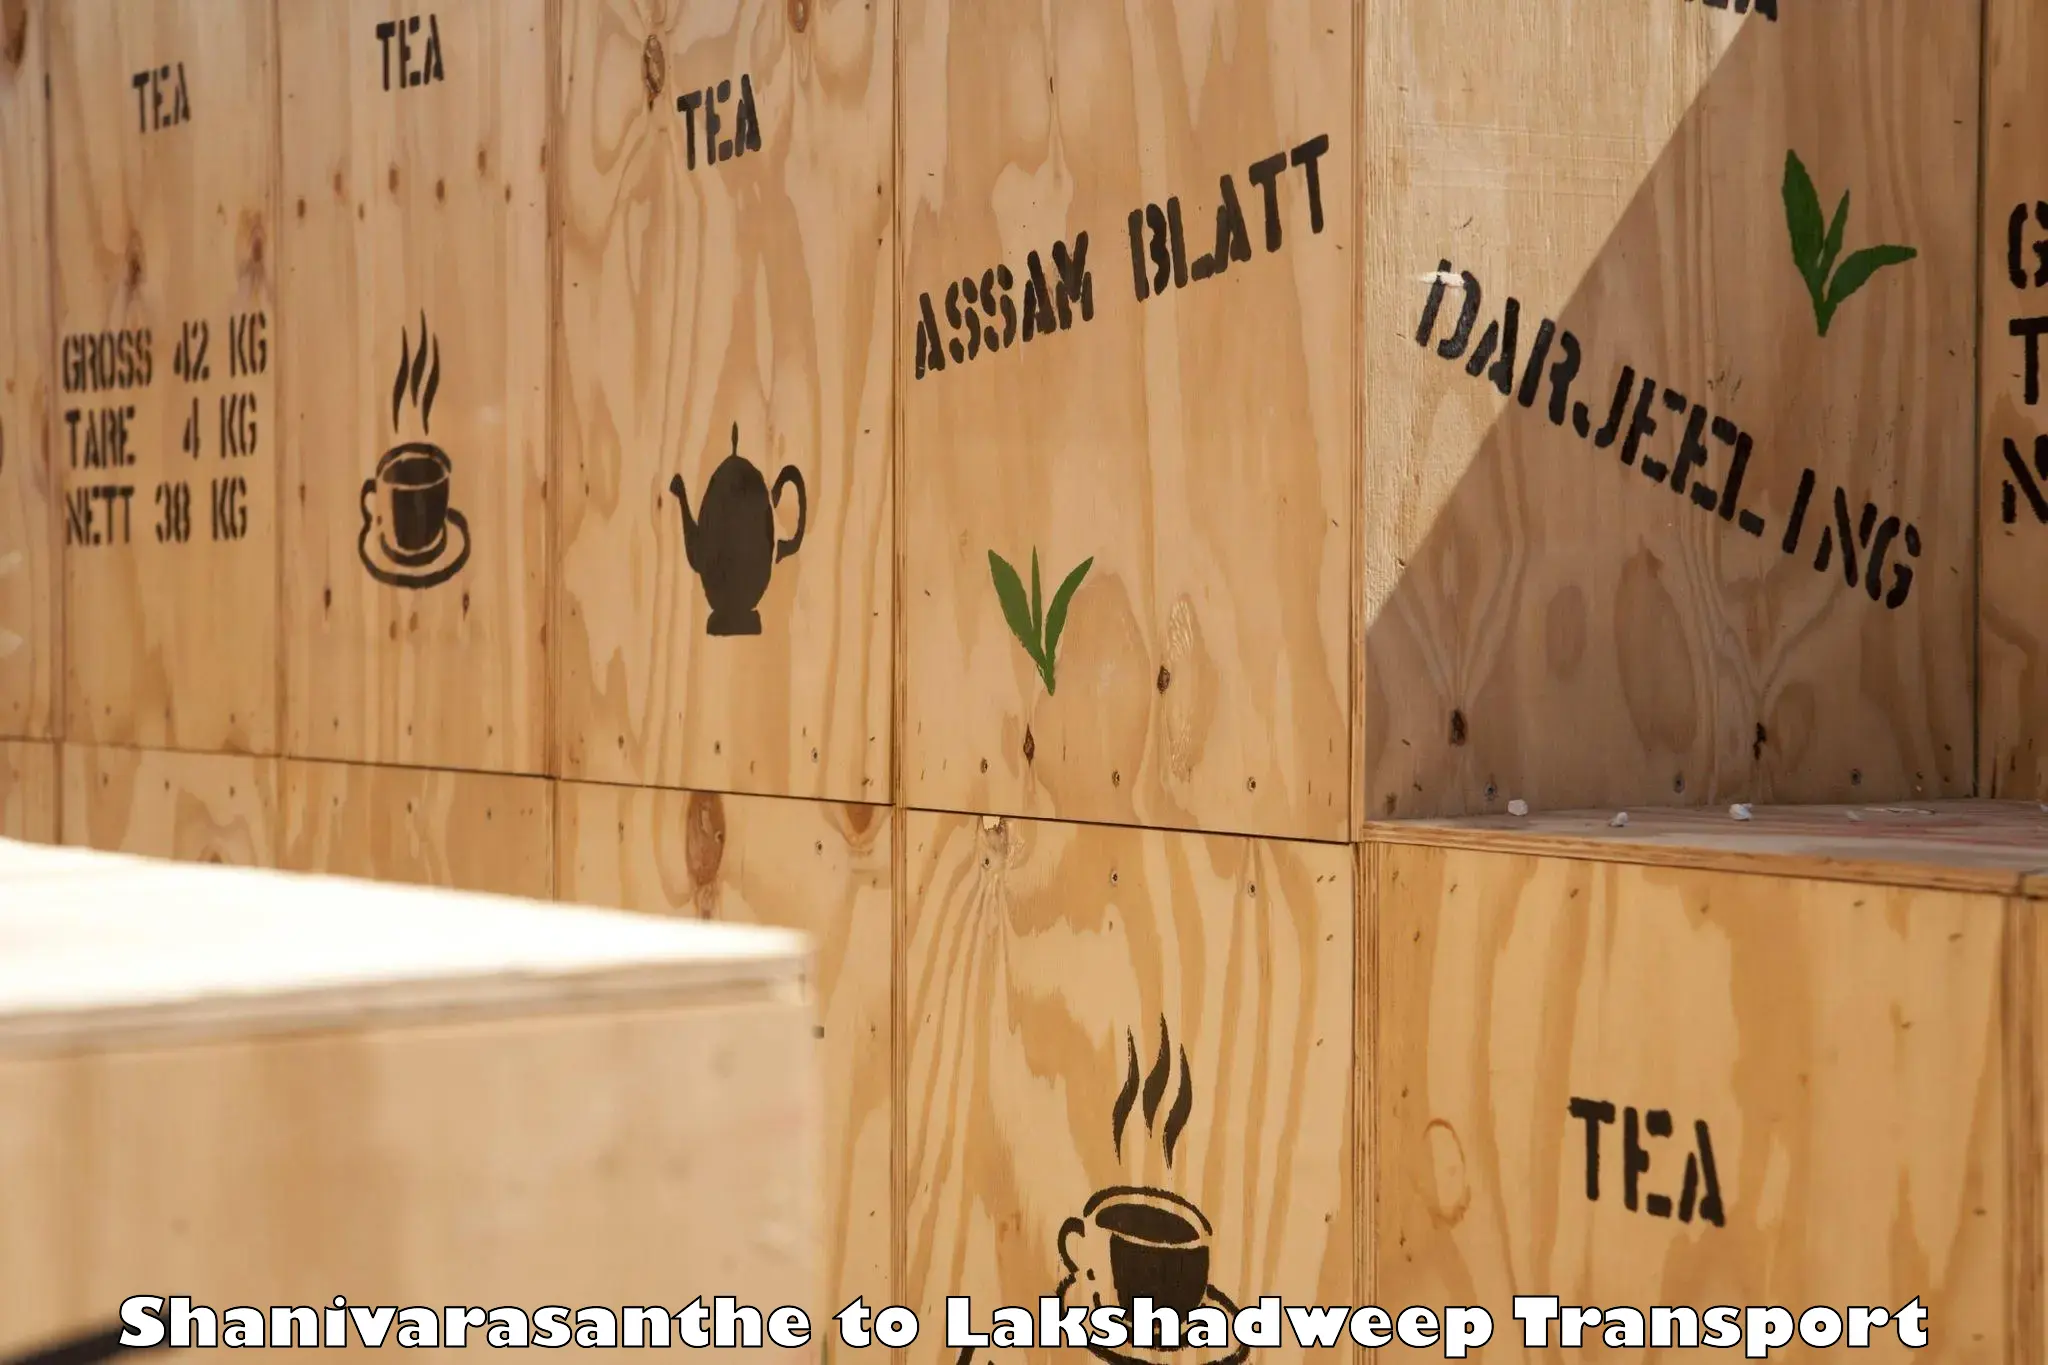 Container transport service in Shanivarasanthe to Lakshadweep